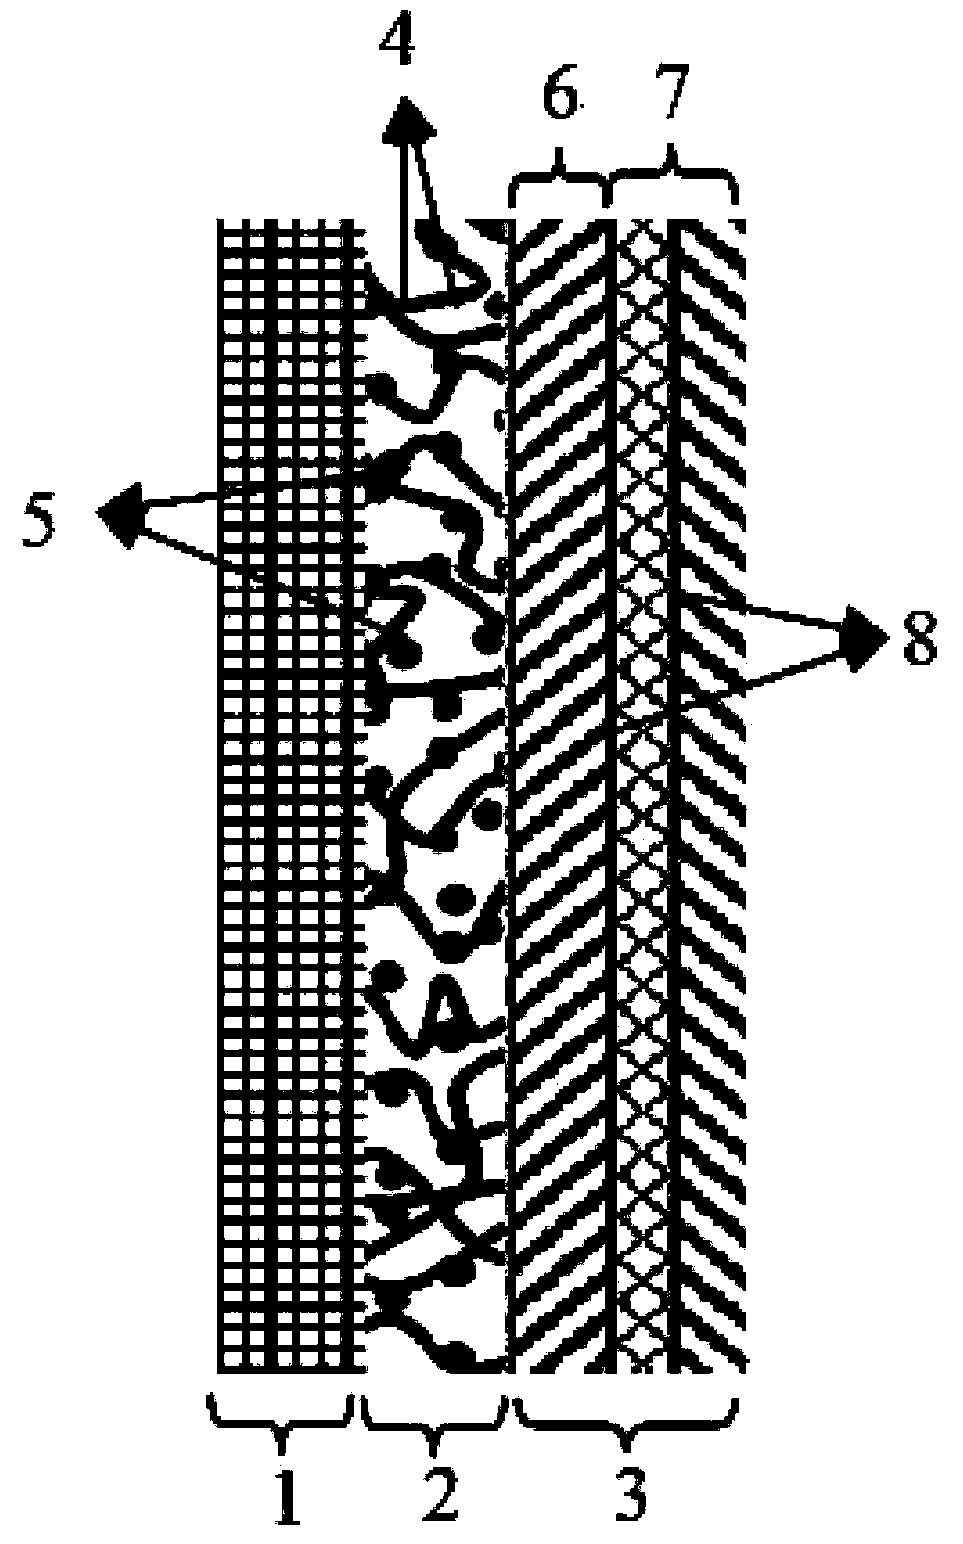 Multi-layer composite cathode of metal-air battery